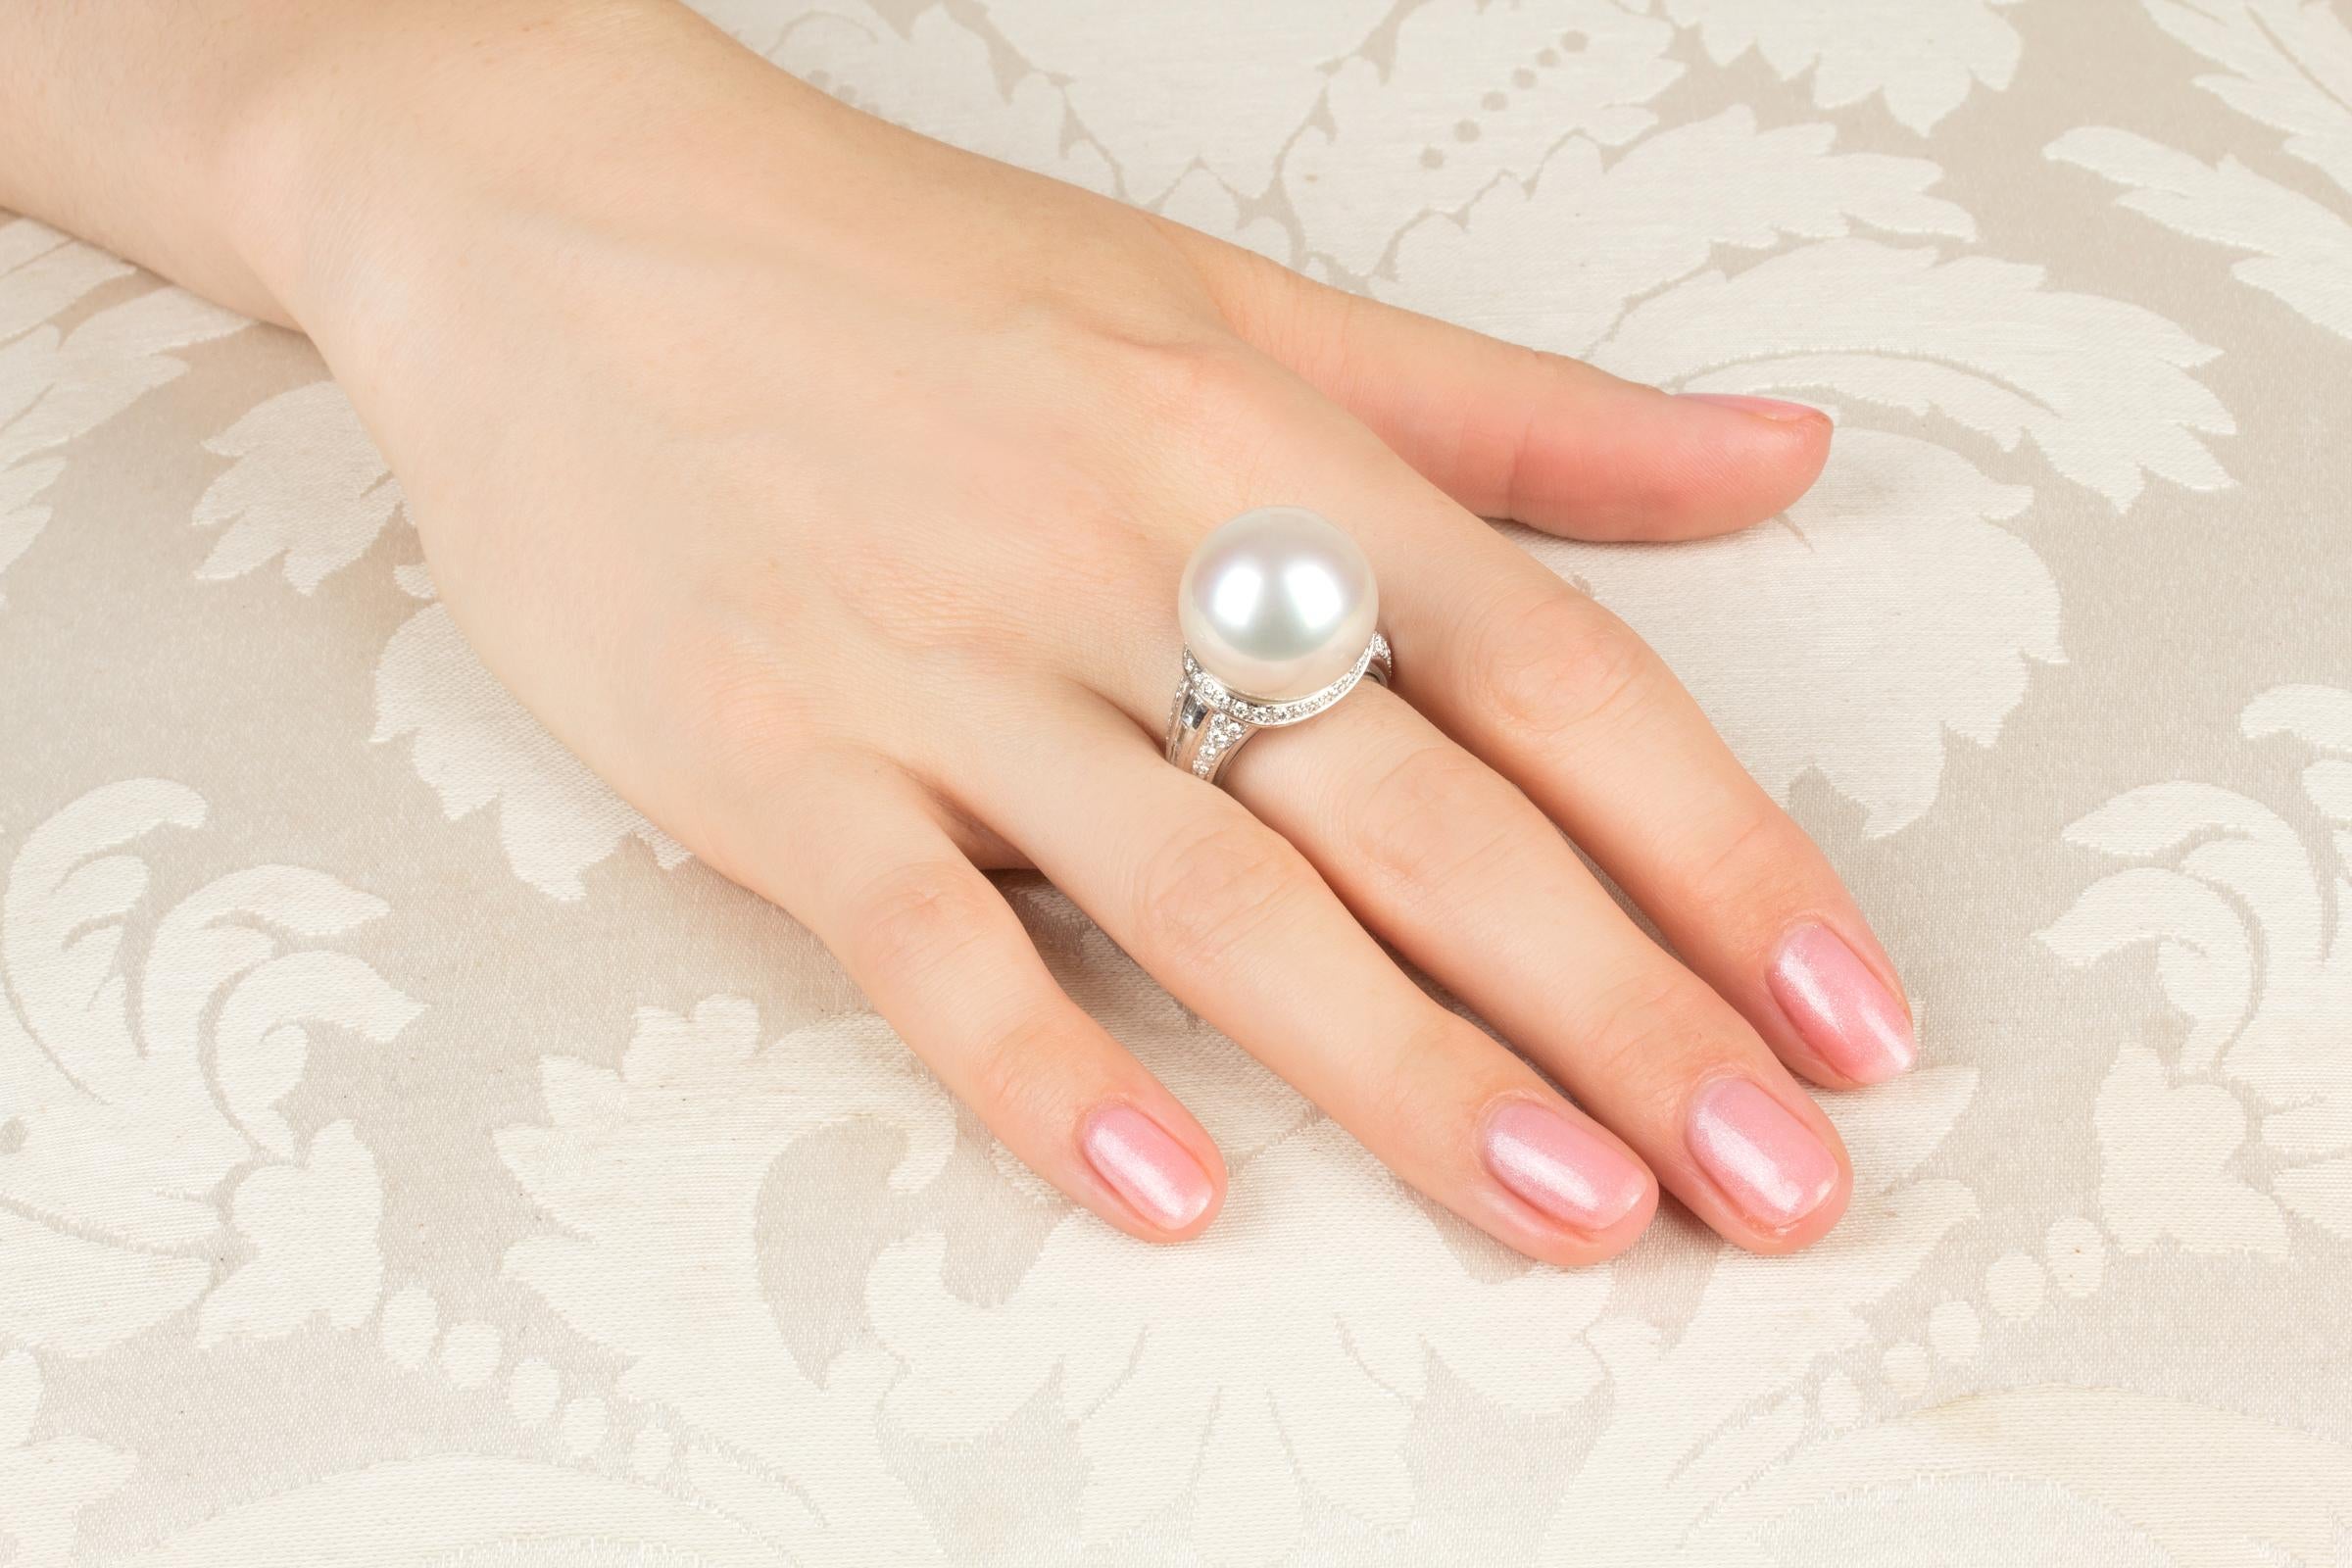 This South Sea pearl and diamond cocktail ring features a large pearl of 18mm diameter. The pearl is untreated. It displays a splendid nacre and its natural color and luster have not been enhanced in any way. The pearl is perched on a crown of round